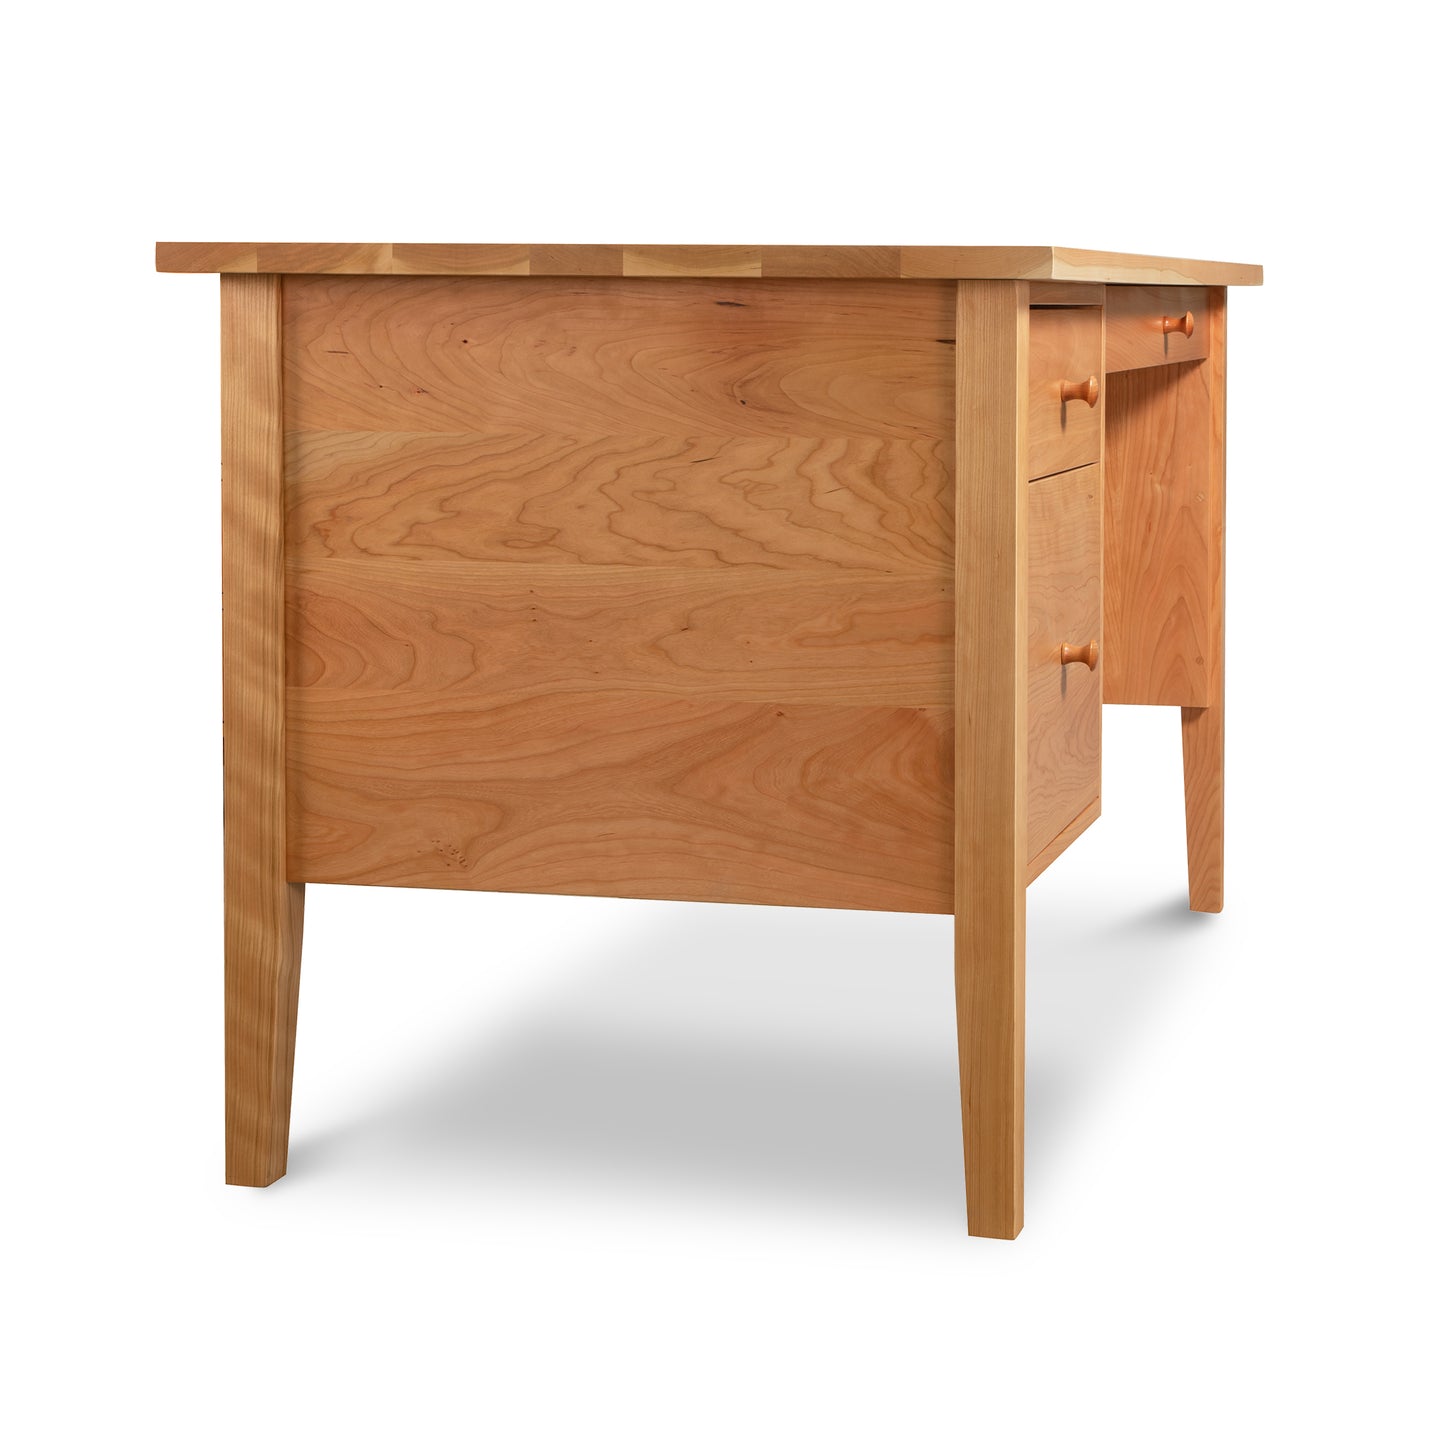 A wooden desk with a drawer and two drawers.